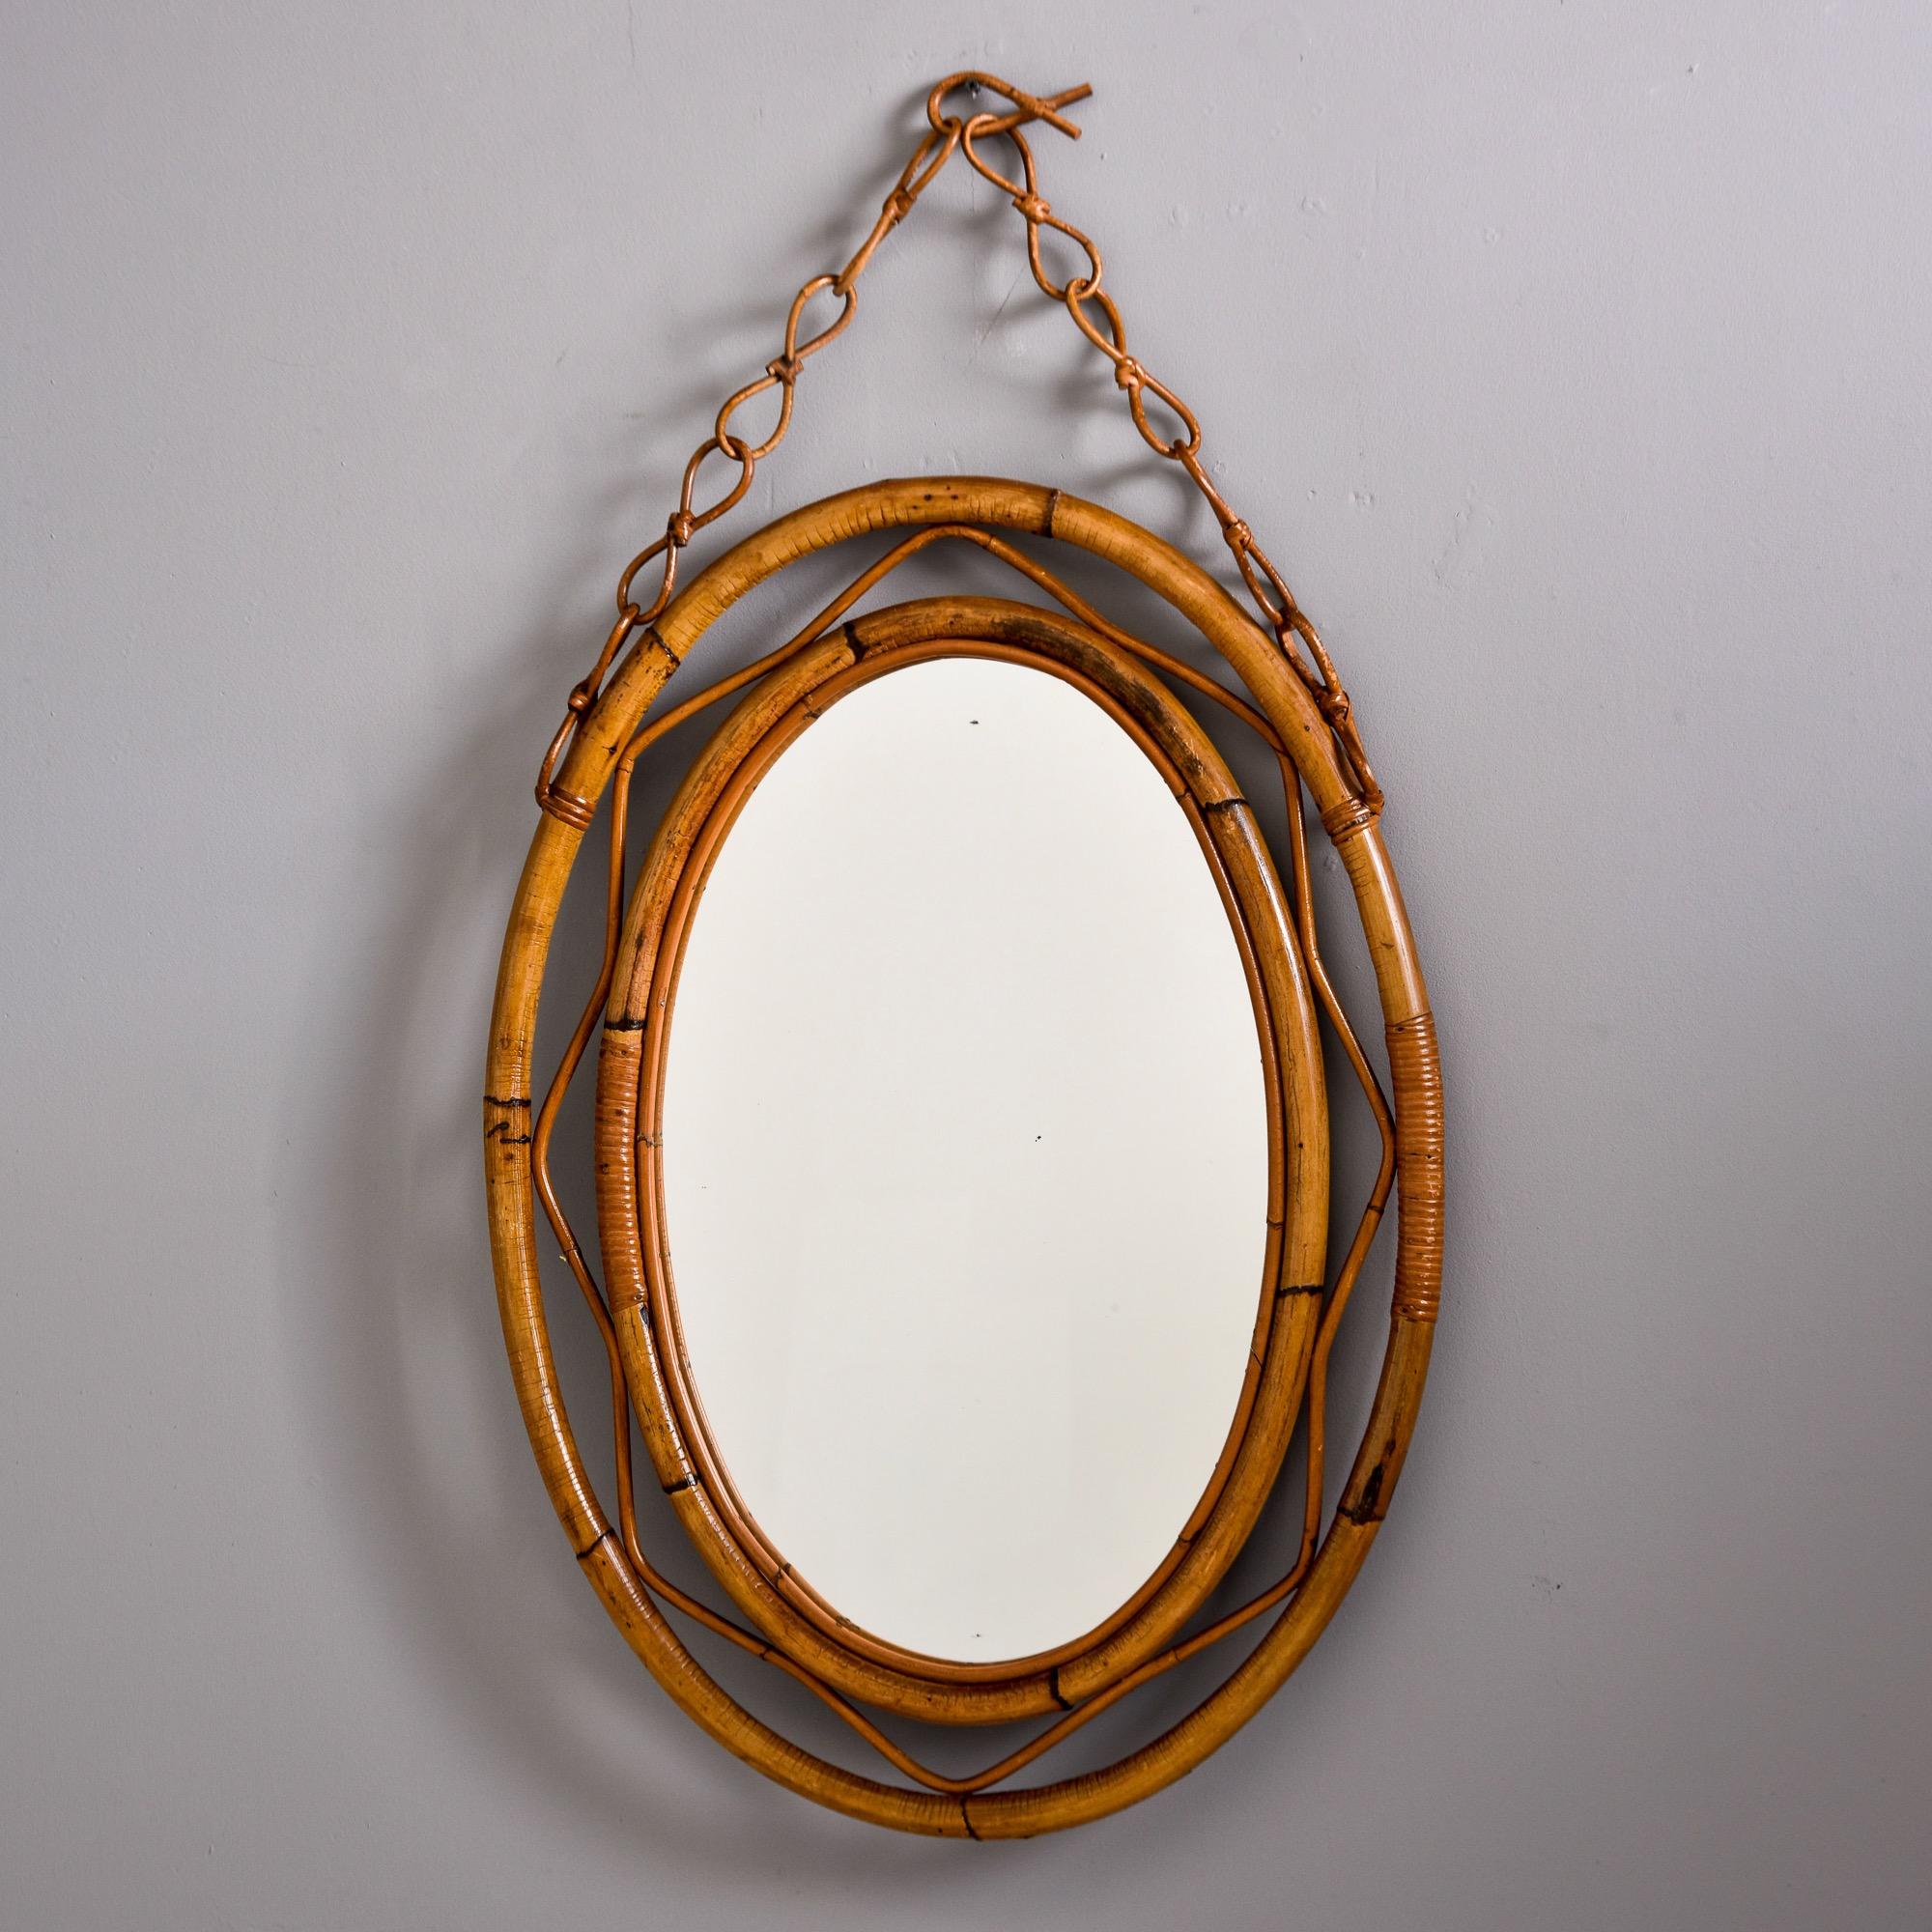 Found in Italy, this hanging oval mirror with rattan frame dates from the 1970s. Unknown maker - oval mirror with double rattan frame and hanging rattan chain. Very good vintage condition with no flaws found - minor expected wear only.

Height With